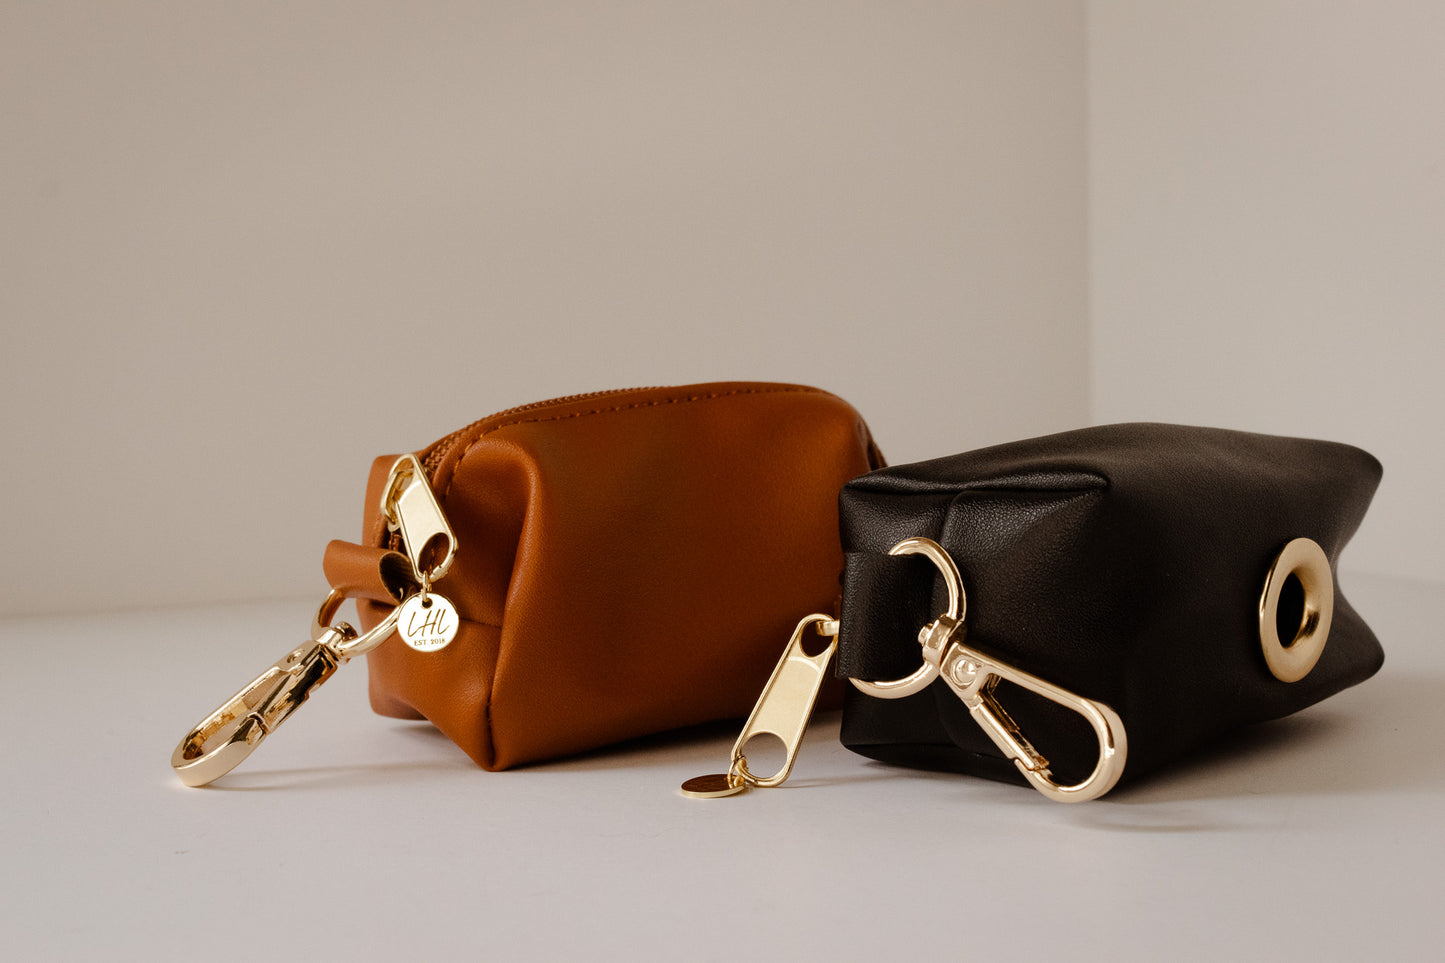 The Oakleigh Leather Poop Bag Holders